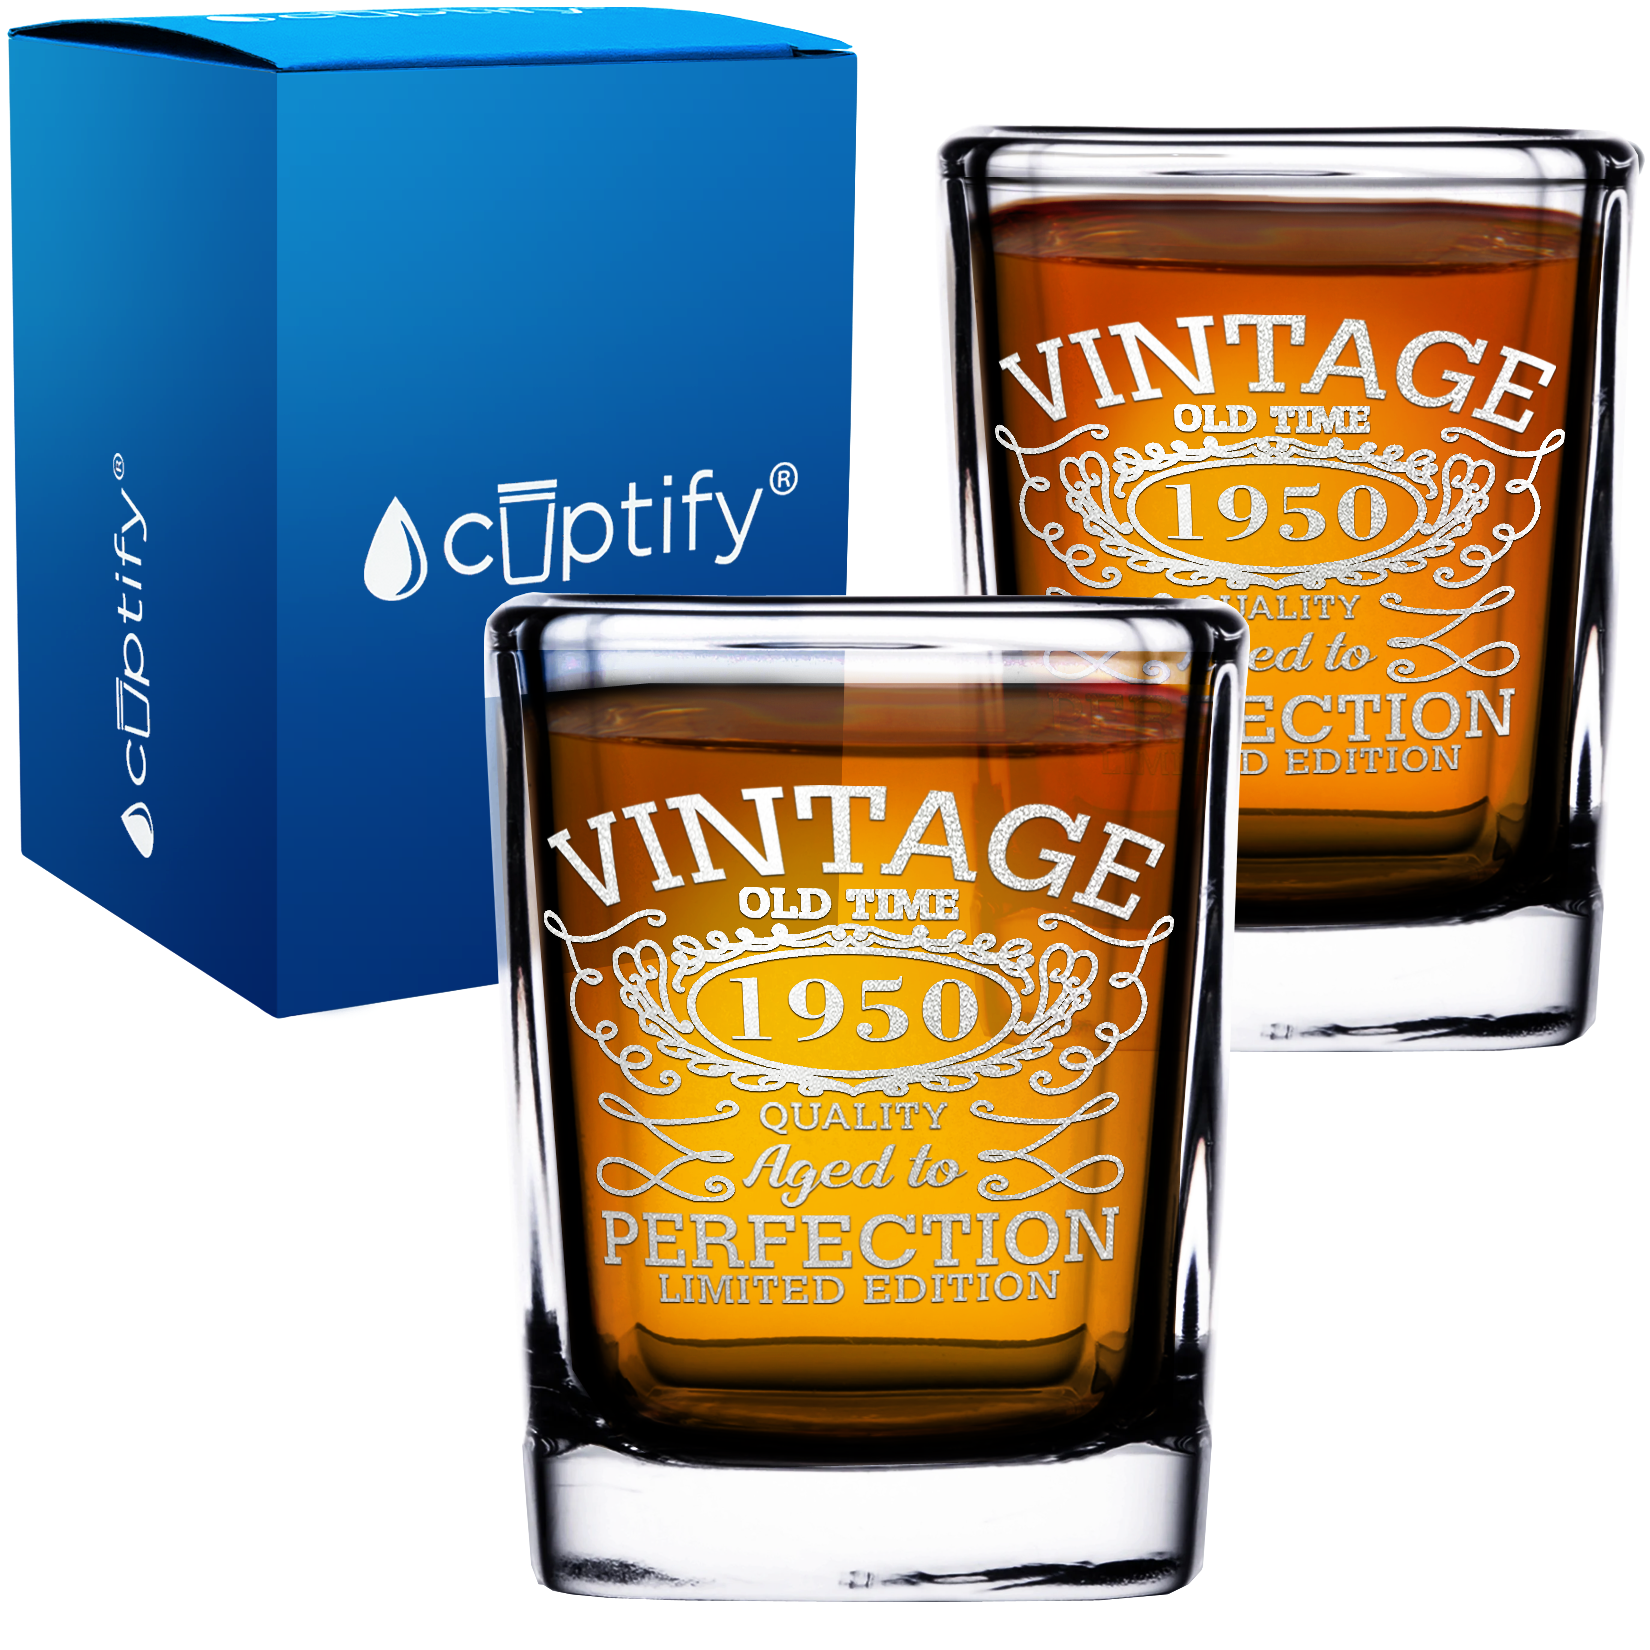 72nd Birthday Vintage 72 Years Old Time 1950 Quality 2oz Square Shot Glasses - Set of 2